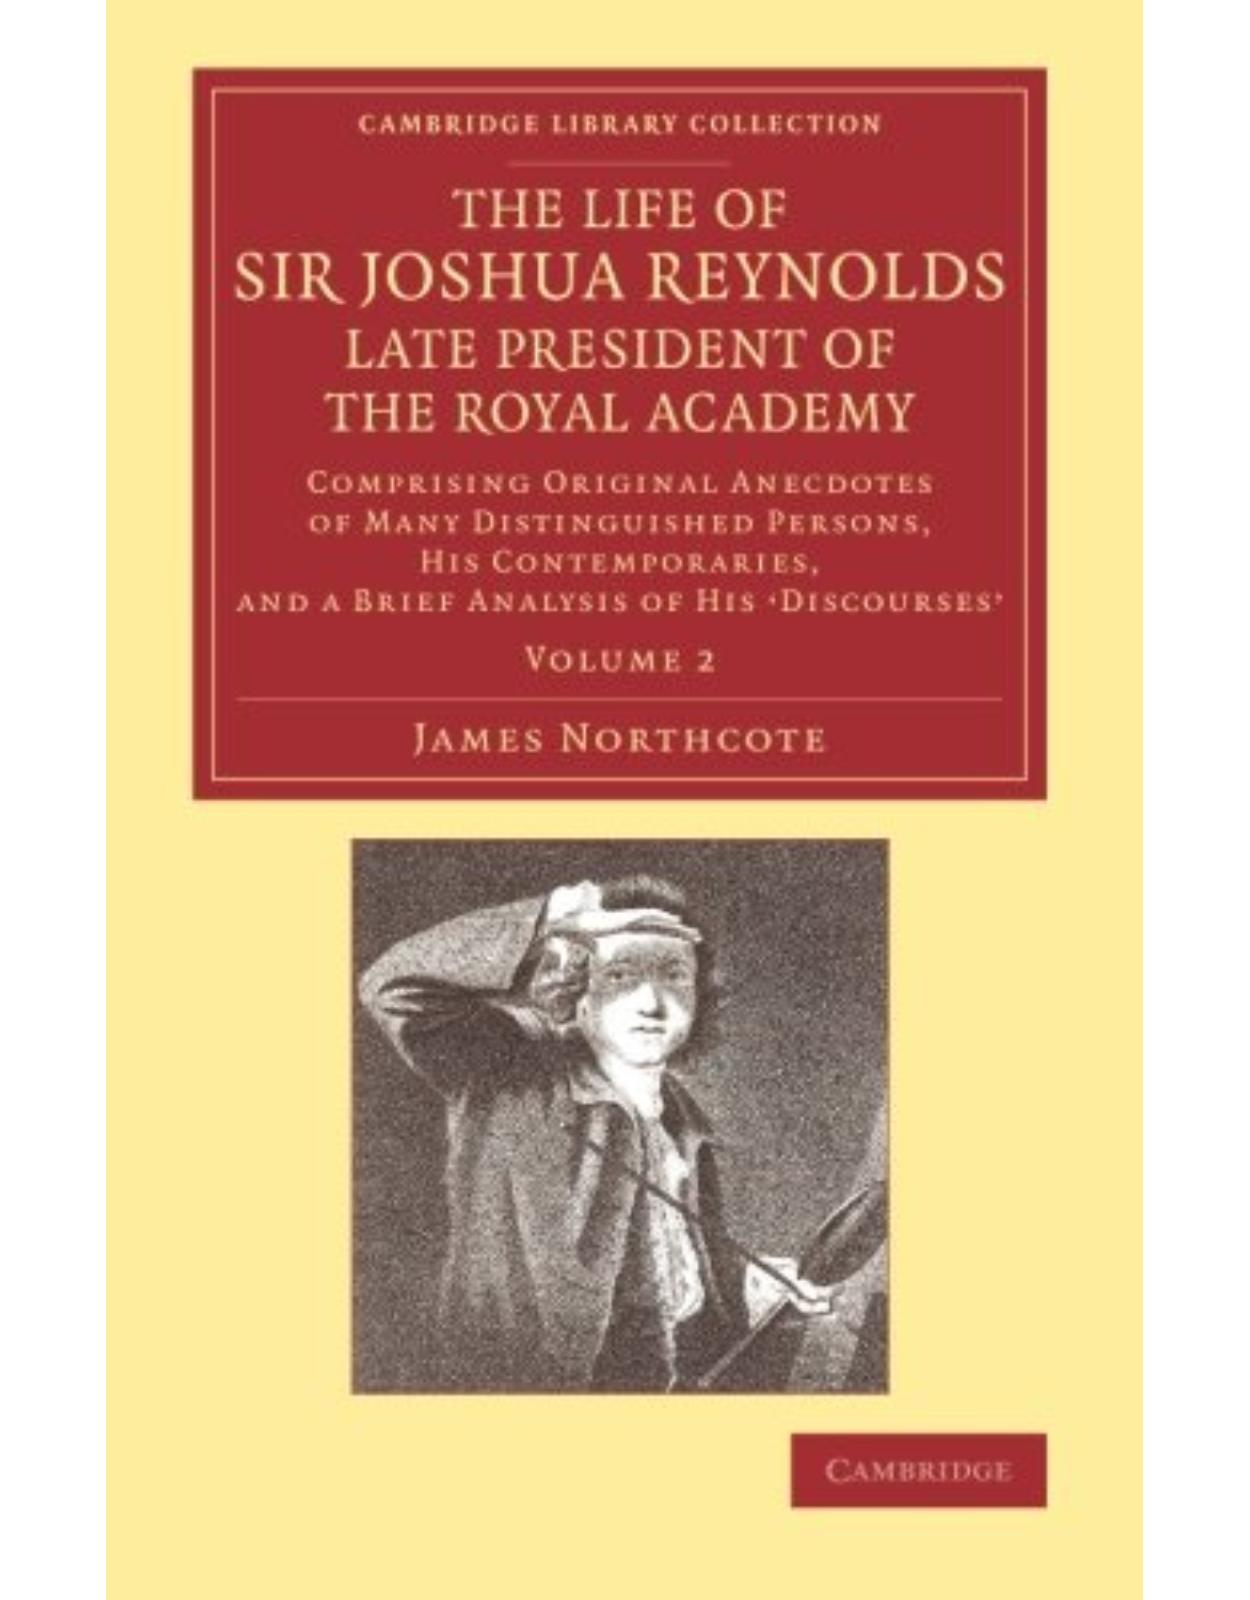 The Life of Sir Joshua Reynolds, Ll.D., F.R.S., F.S.A., etc., Late President of the Royal Academy 2 Volume Set: Comprising Original Anecdotes of Many Distinguished Persons, His Contemporaries, and a Brief Analysis of His ‘Discourses'